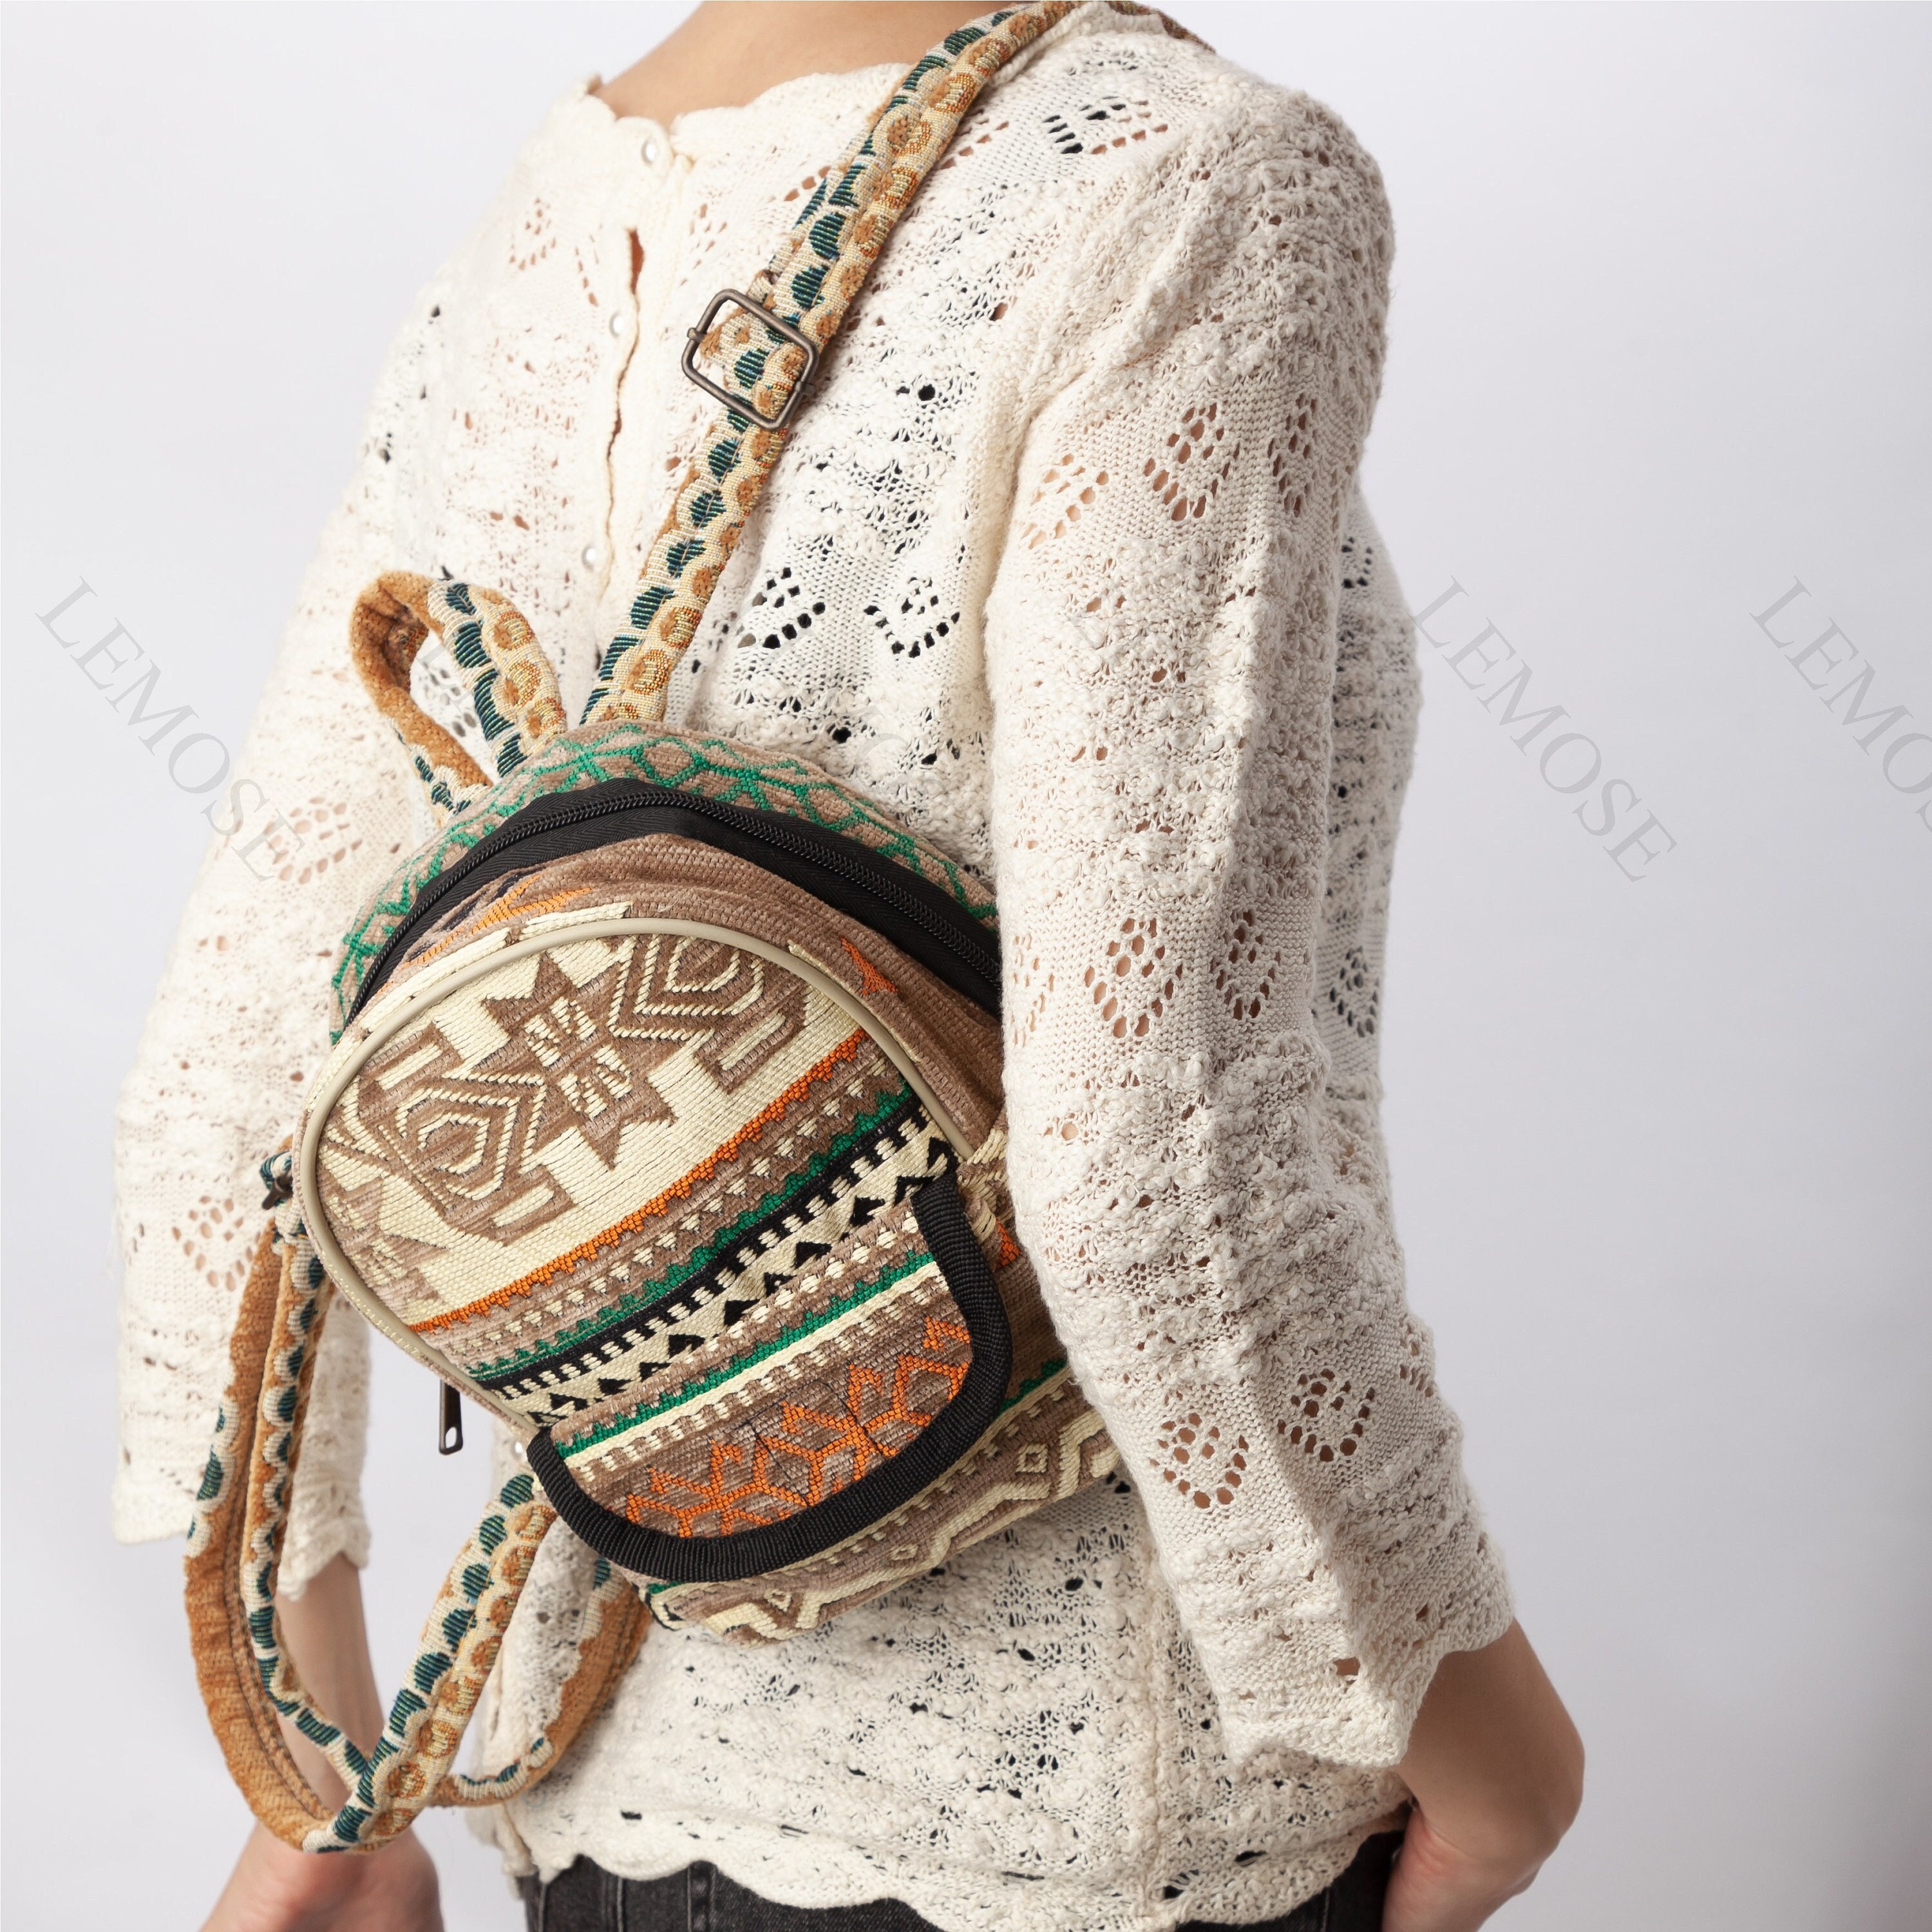  LEMOSE Fashion Backpack Purse for Women, Vintage Boho-Hippie  Shoulder Daypack, Small Casual Bag, Ethnic Turkish Pattern Embroidered  Chenille Woven Backpacks, Stylish Design Cute Travel Bags : Clothing, Shoes  & Jewelry